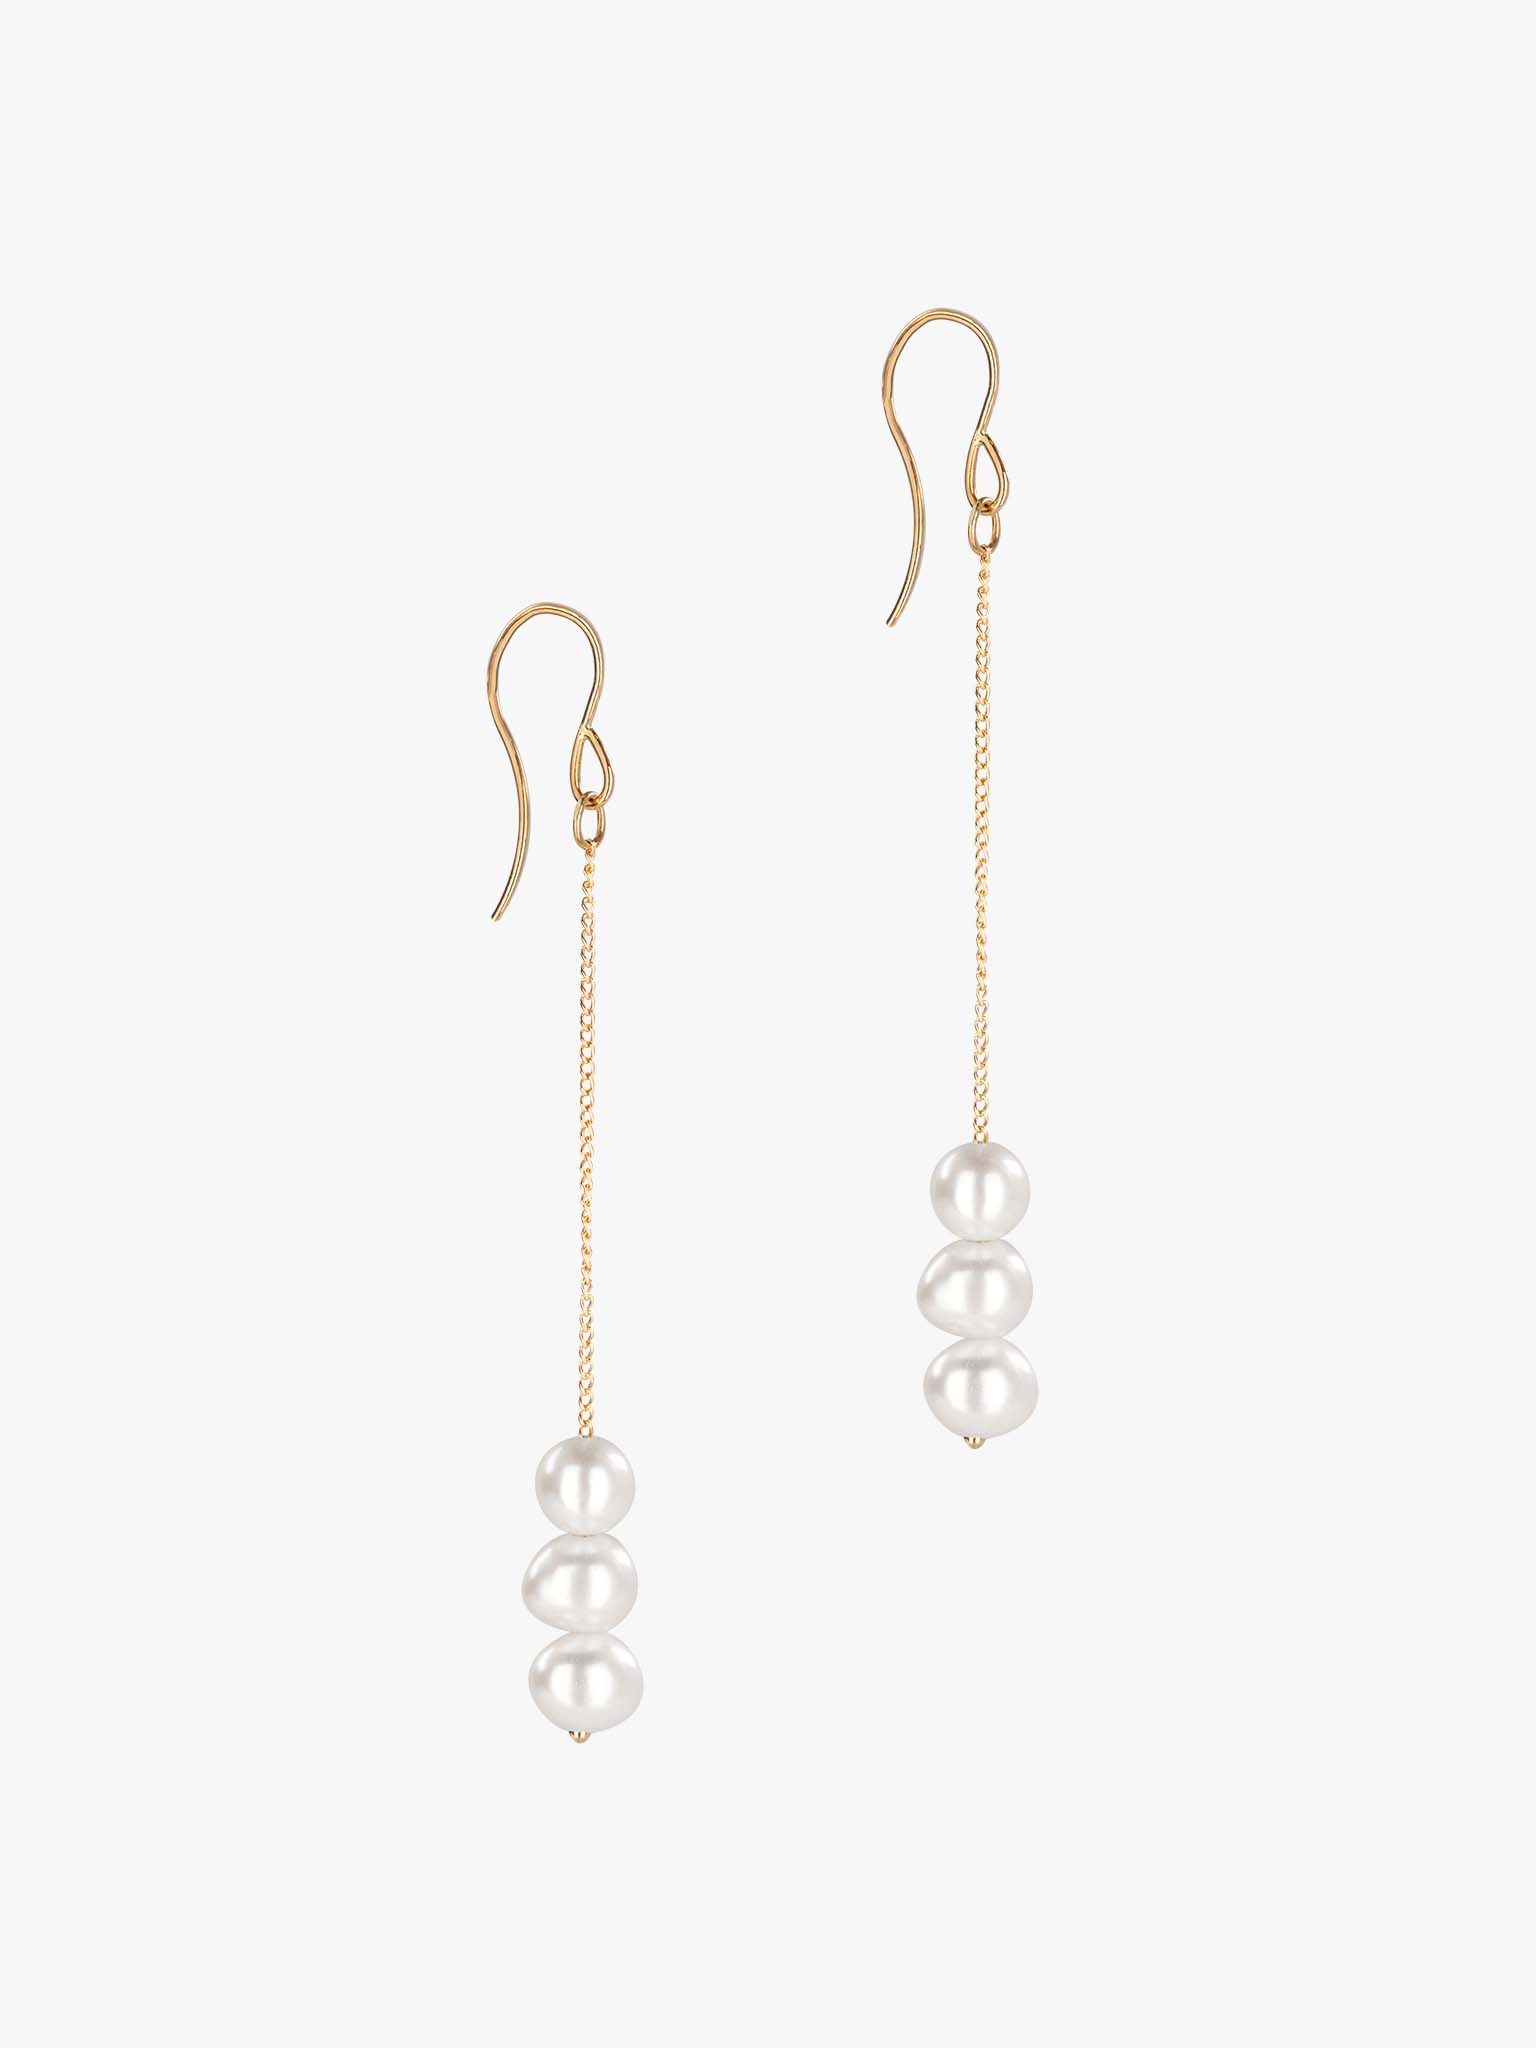 Chain drop earrings with pearls